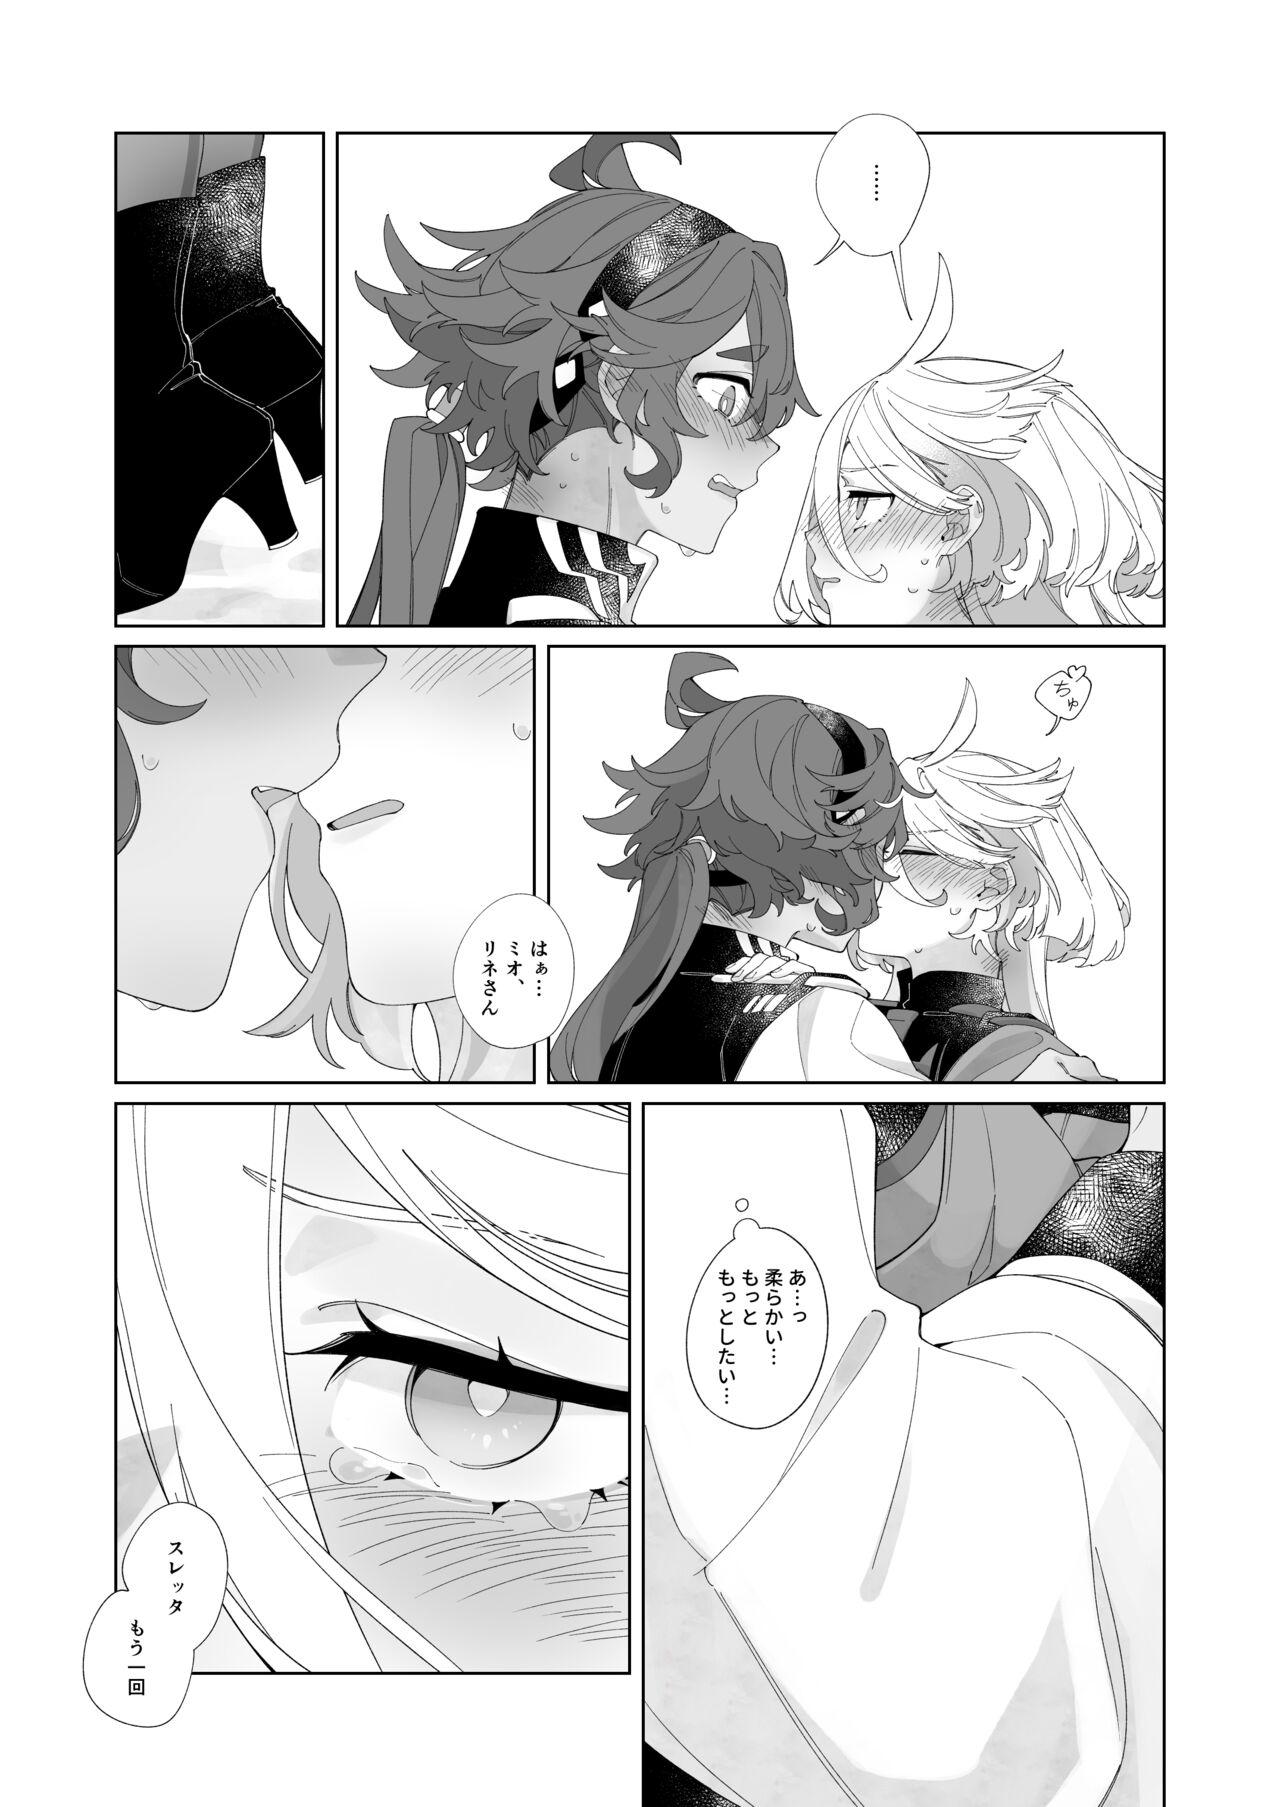 Chica Kiss no Ato Nani ga Shitai? - After kissing, what else do you want to do? - Mobile suit gundam the witch from mercury Backshots - Page 7